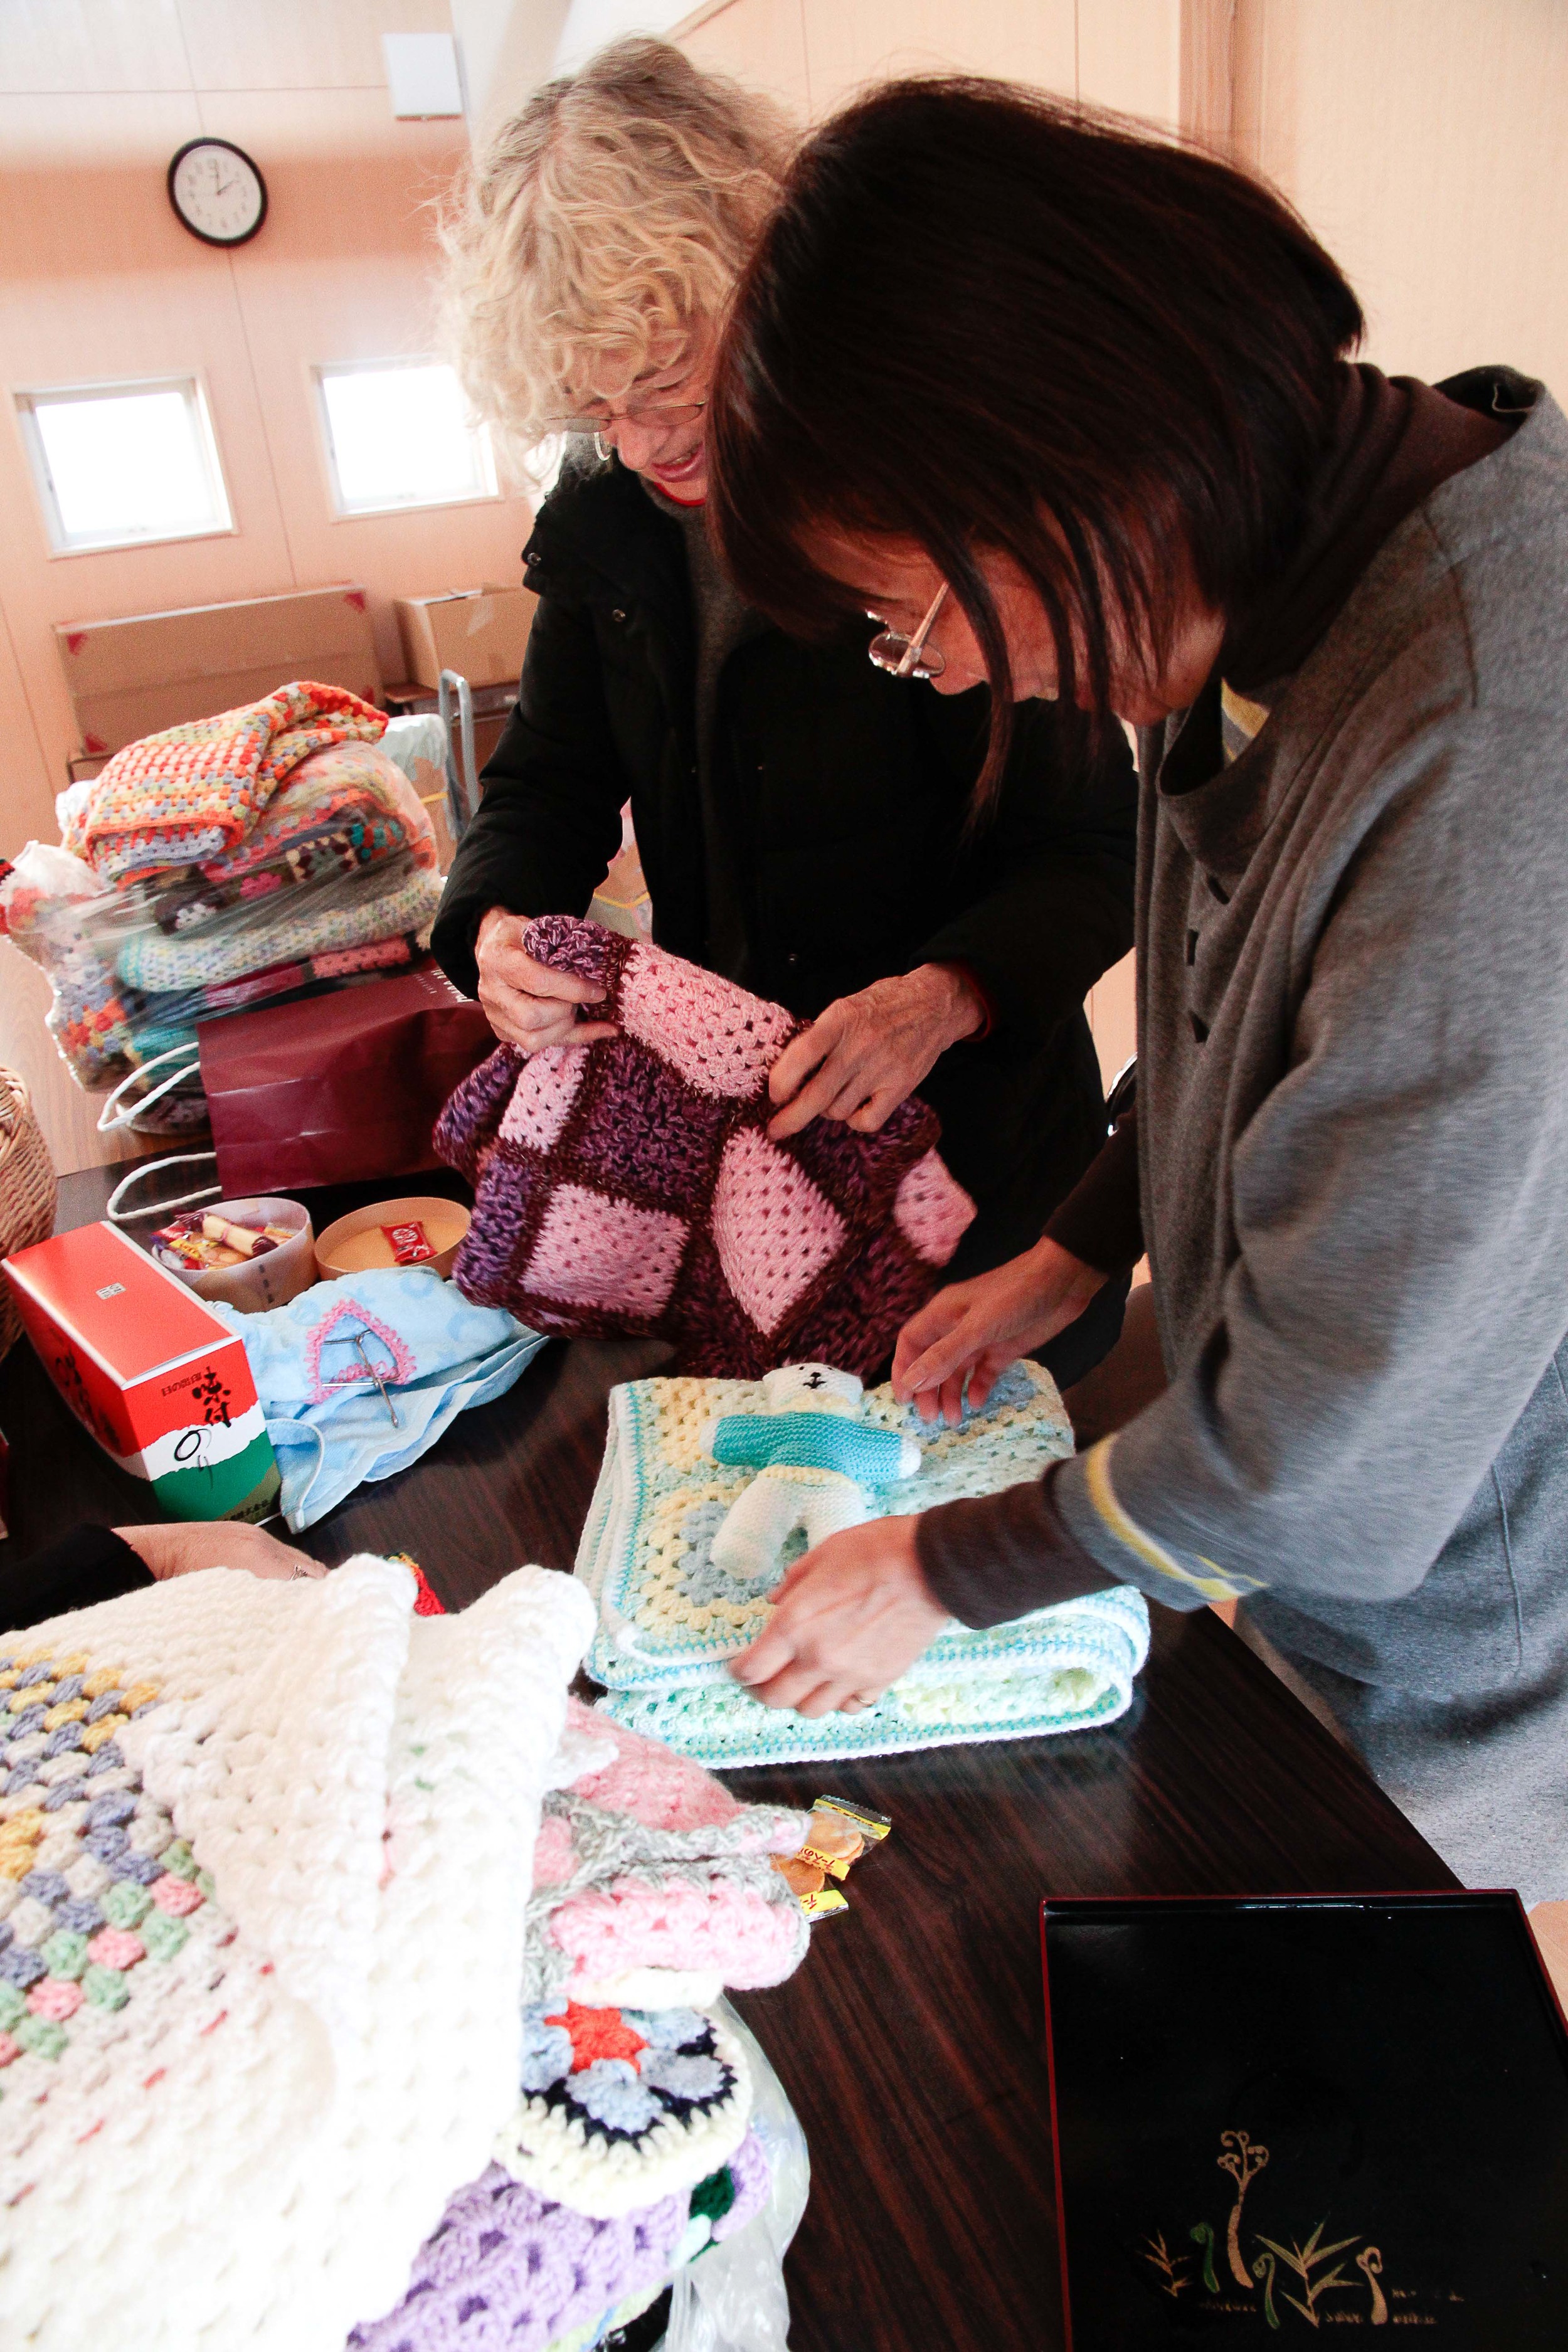 London's Kyoku-Kyoku share group made blankets with matching teddy bears. These will be given to new infants.